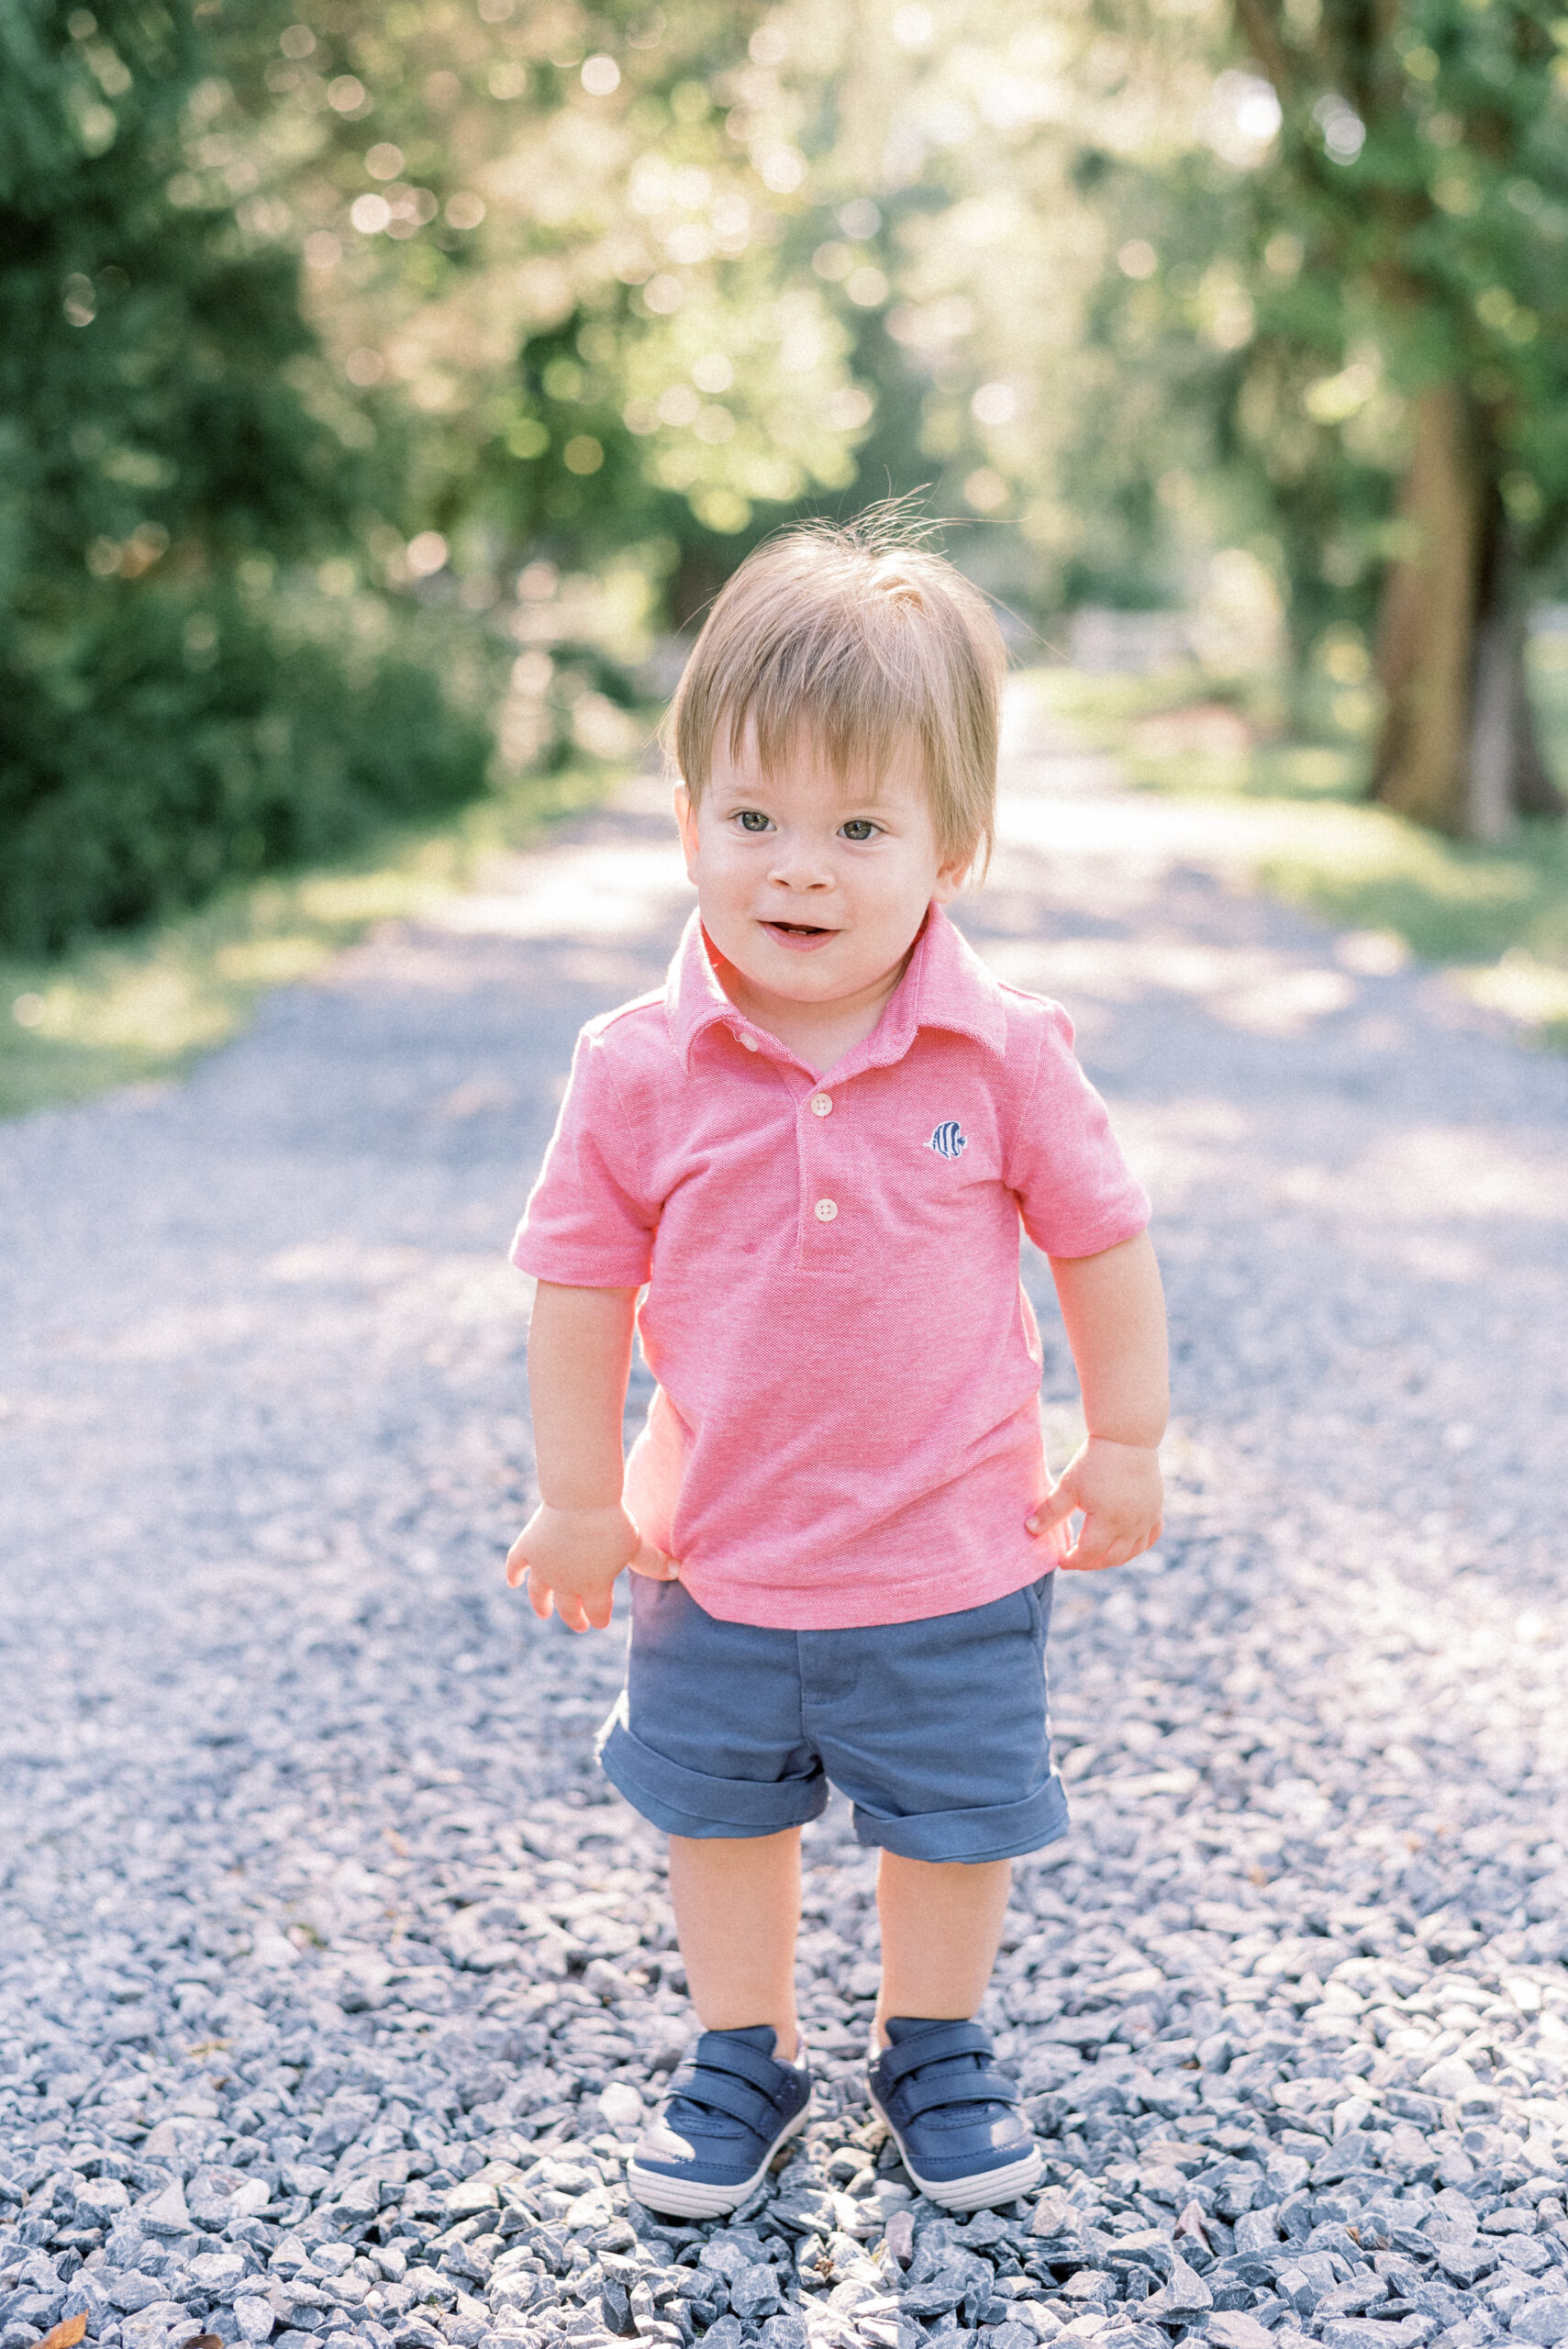 Maryland photographer captures young boy wearing pink shirt during outdoor fall Howard County extended family portraits